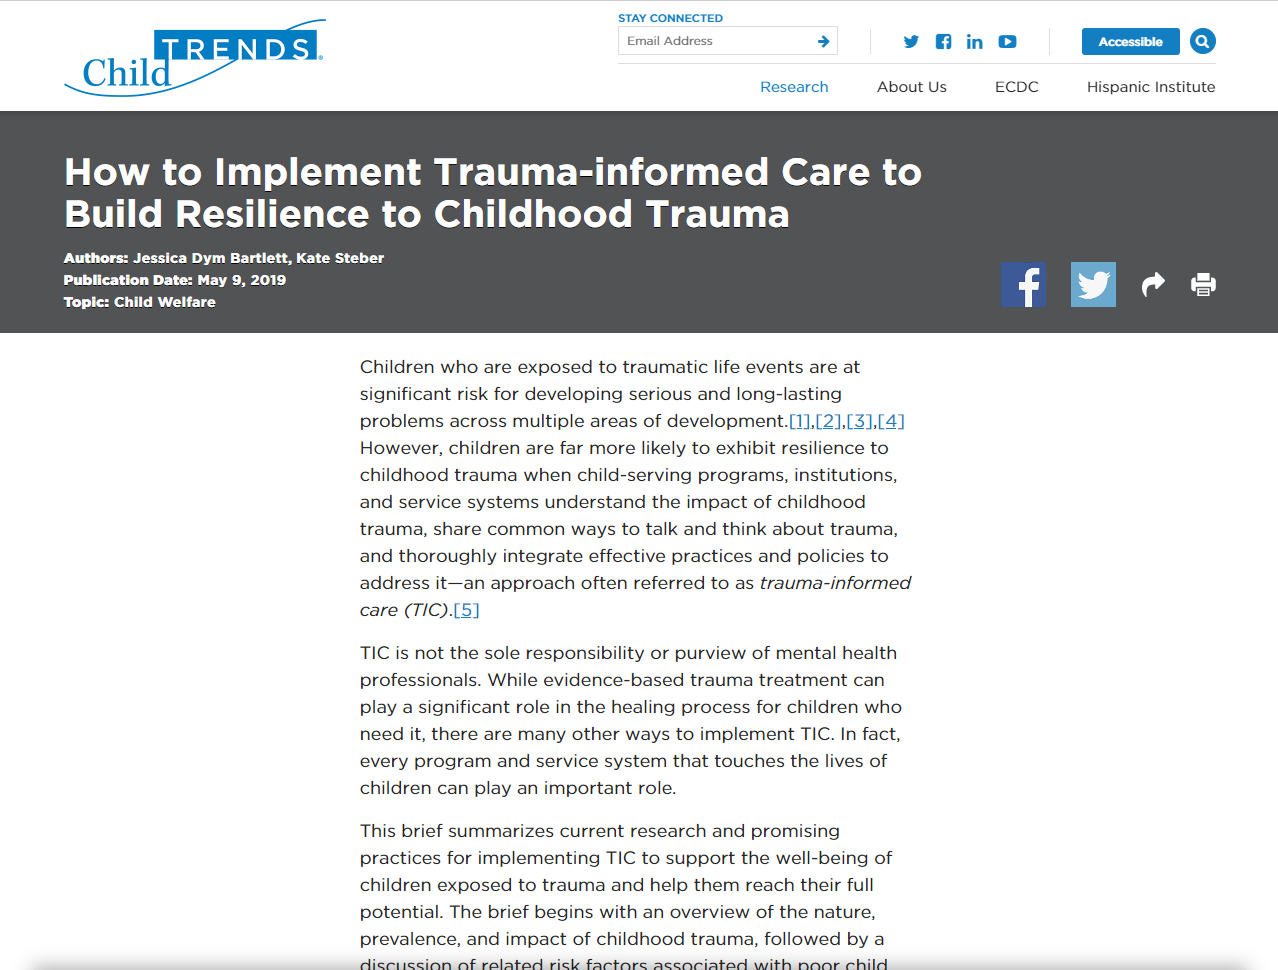 Child Trends: How to Implement Trauma-informed Care to Build Resilience to Childhood Trauma